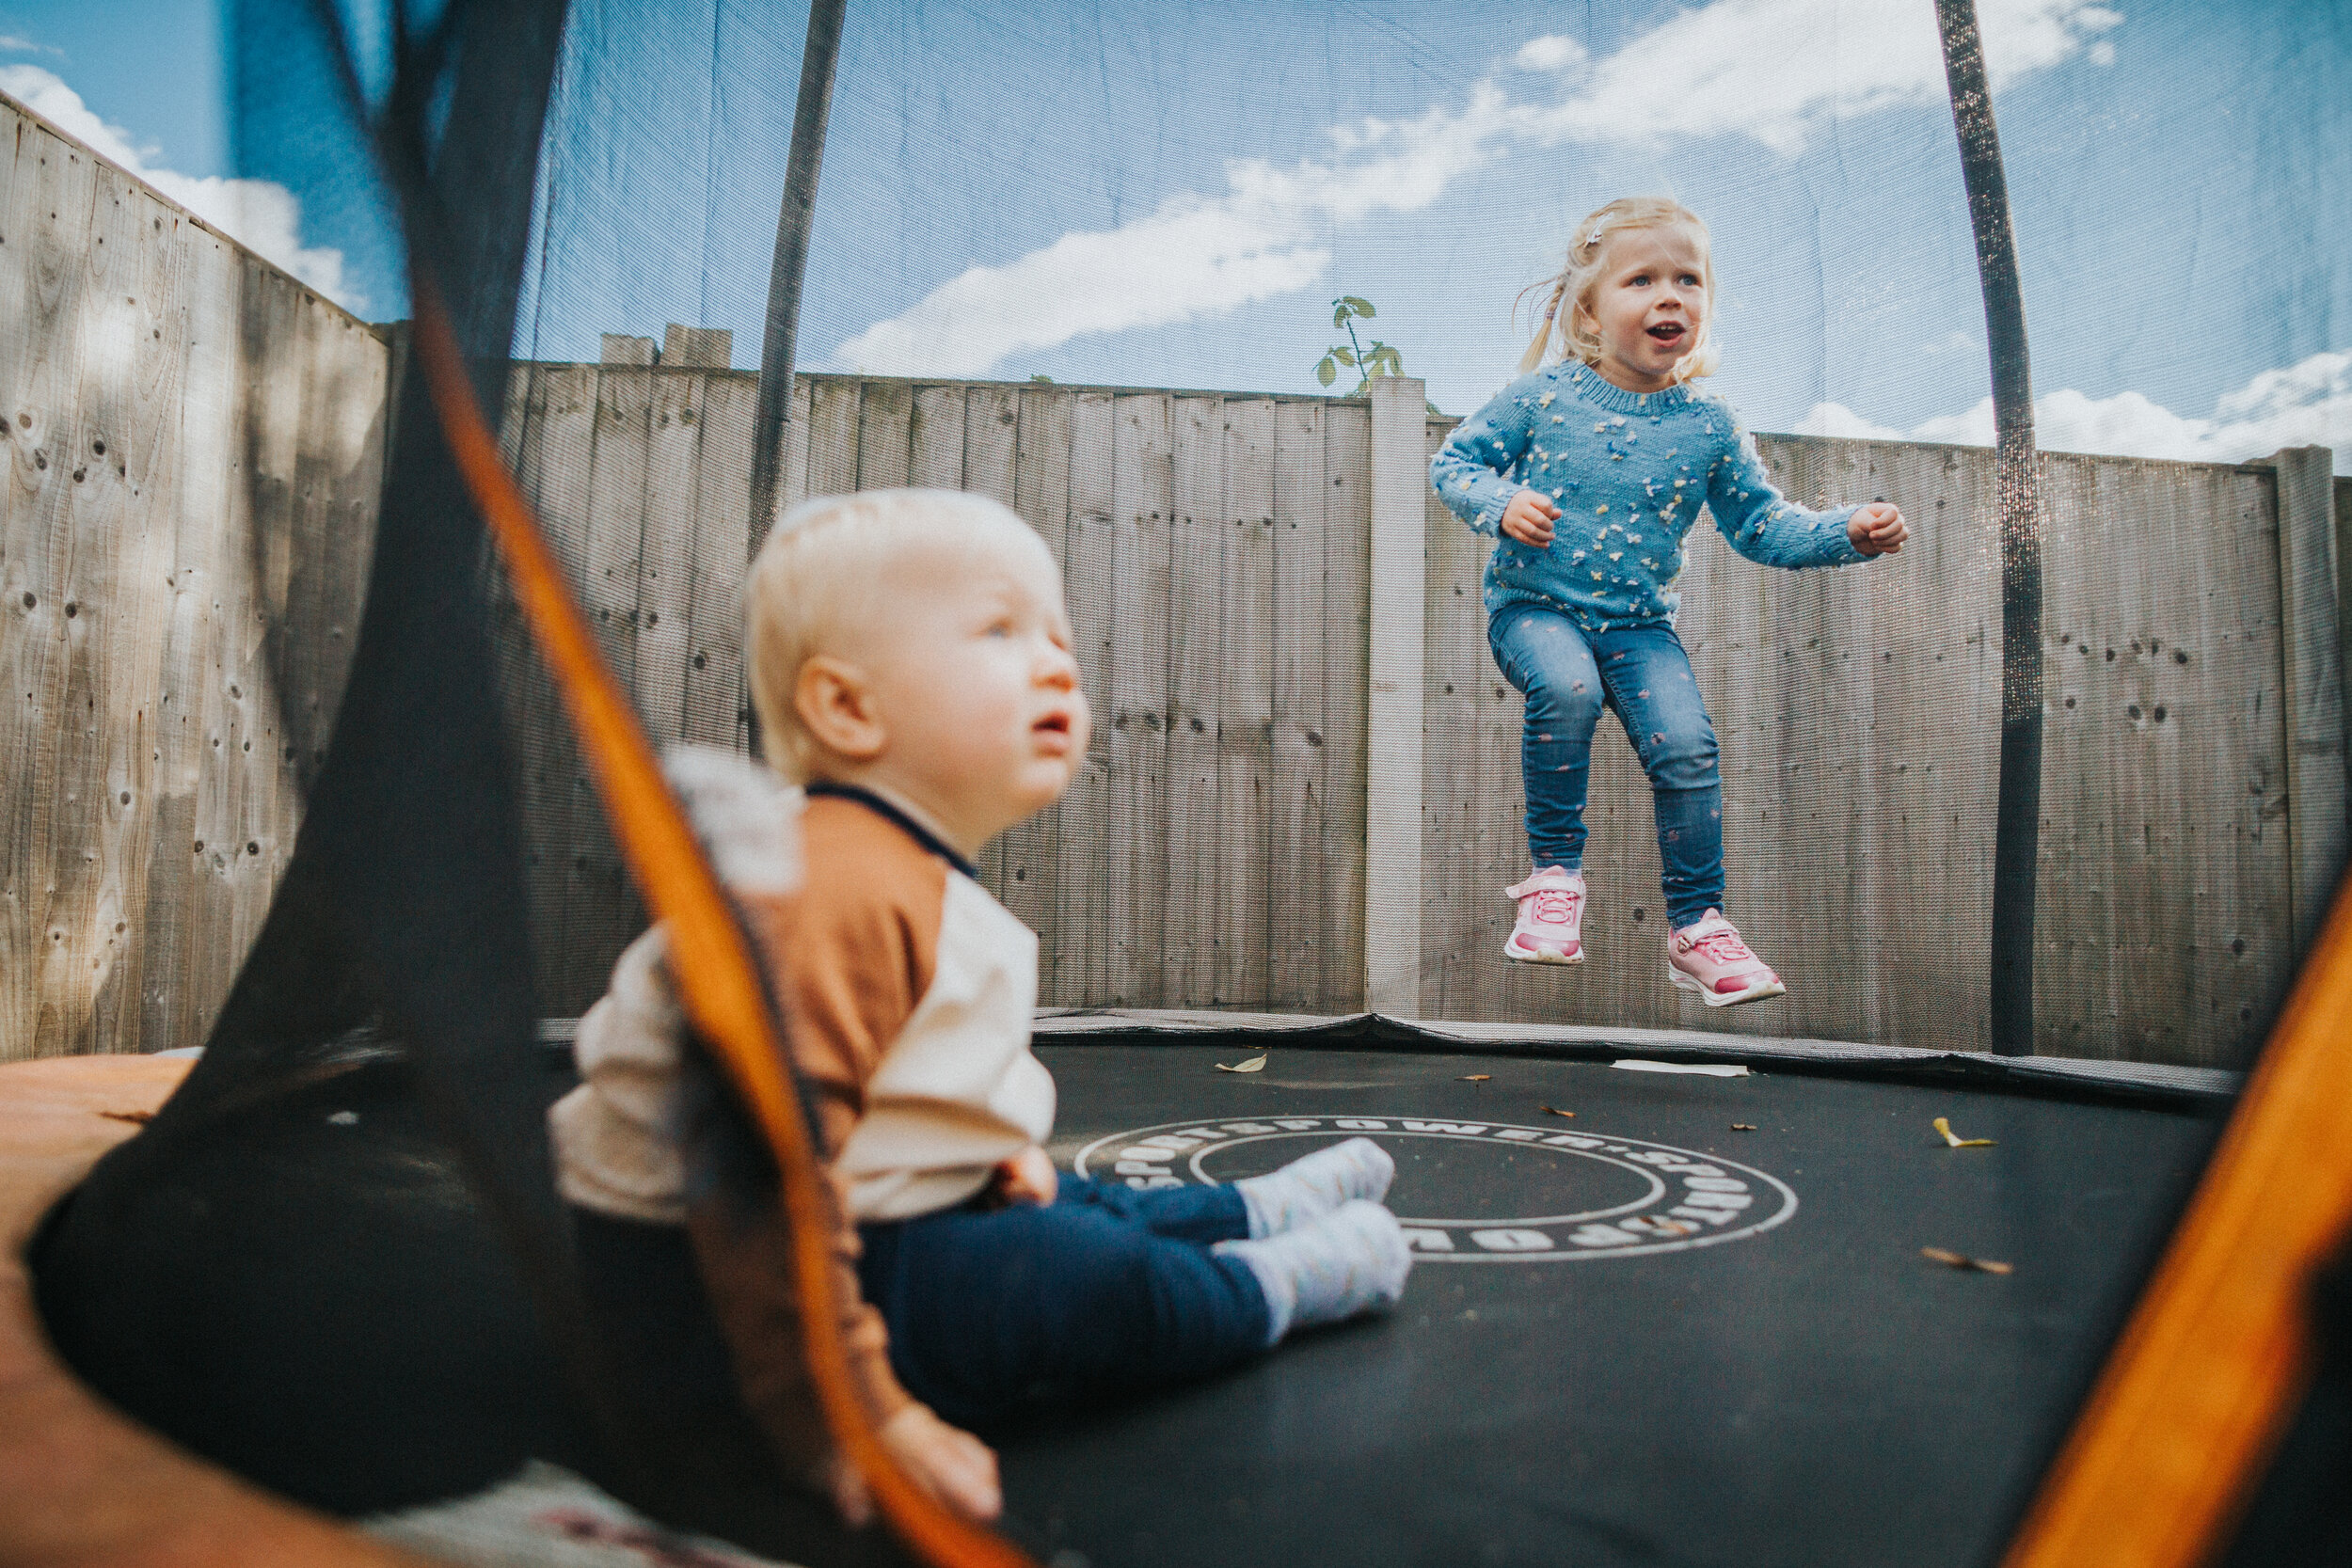 Little girl jumps on trampoline with her baby brother. 